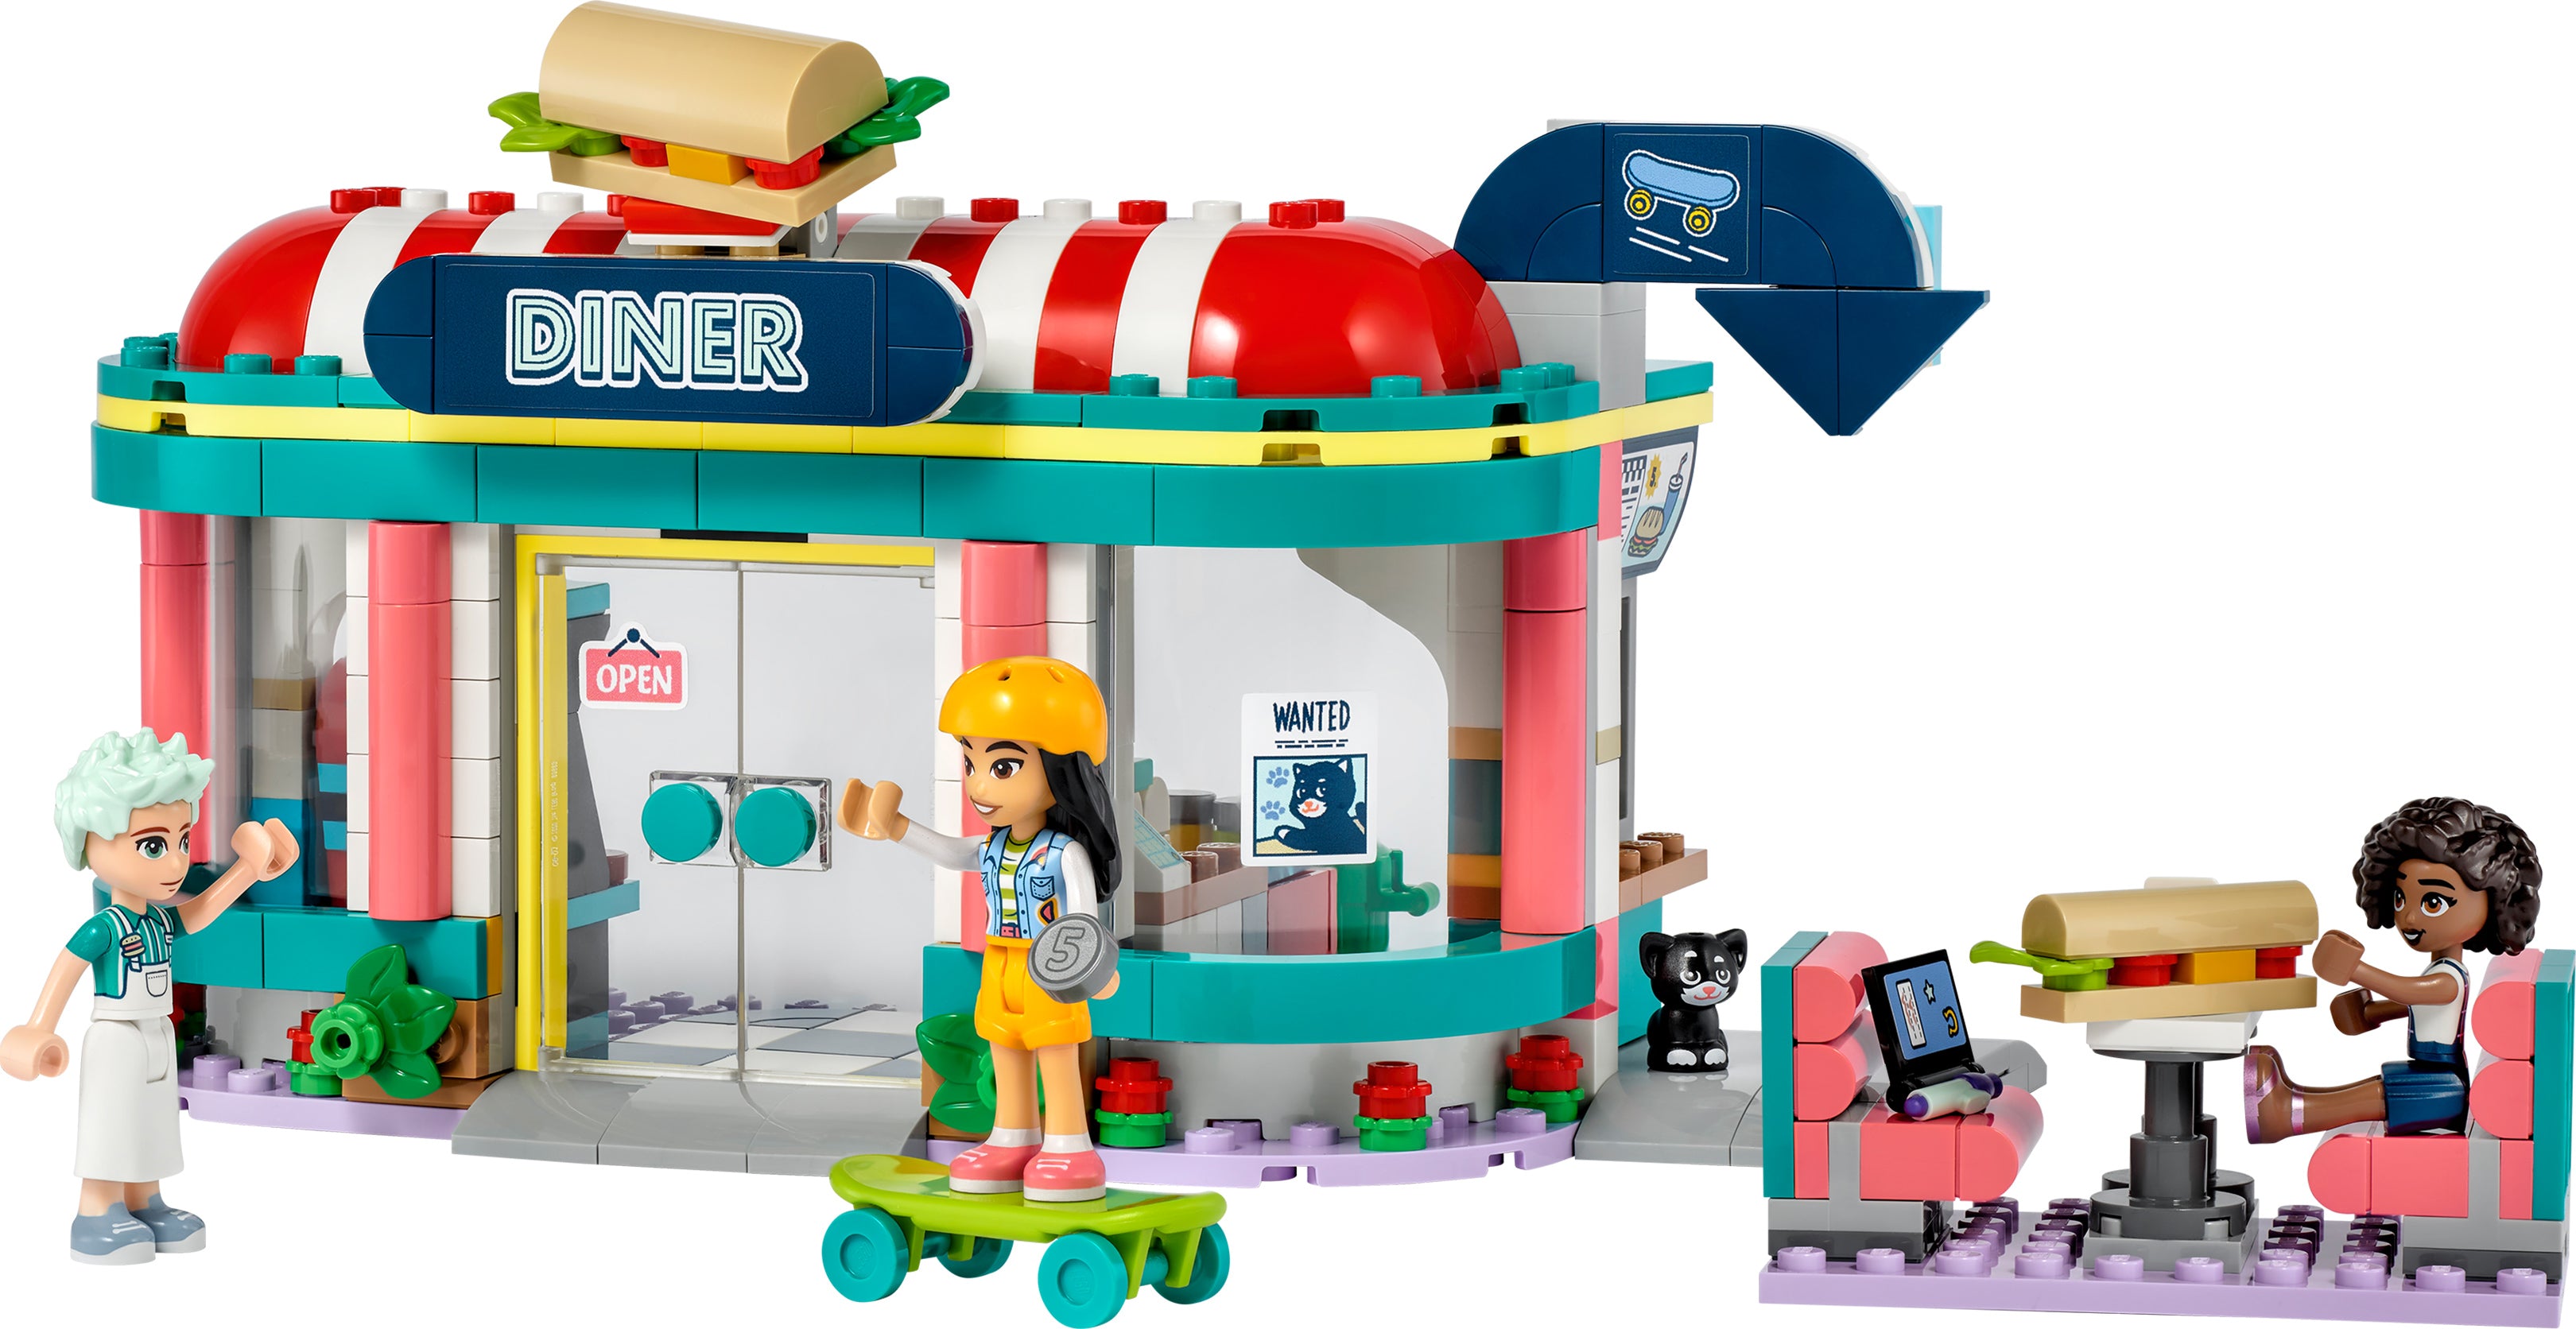 LEGO 41720 Friends Water Park Set 41720 Swimming Pool and Slides, Heartlake  City Summer Toy for Kids Aged 6 Plus, Birthday Gift Idea 